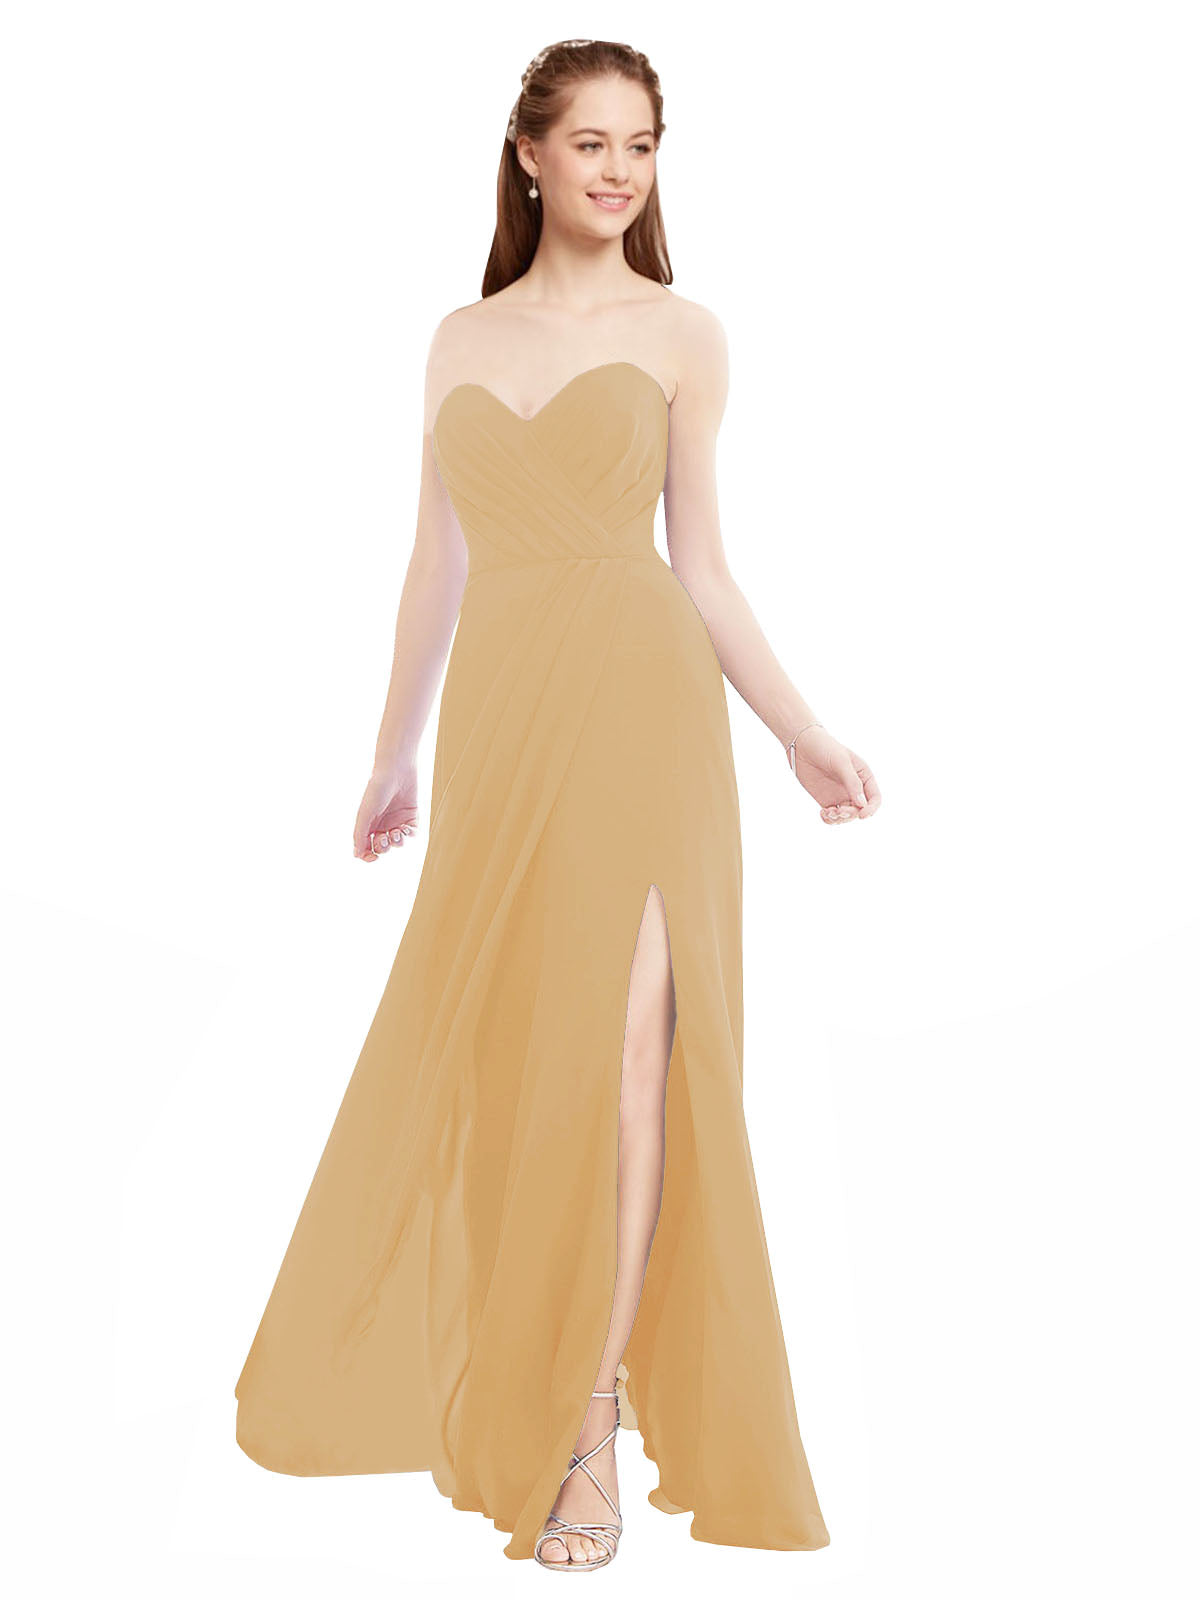 Gold A-Line Sweetheart Strapless Sleeveless Long Bridesmaid Dress Meadow